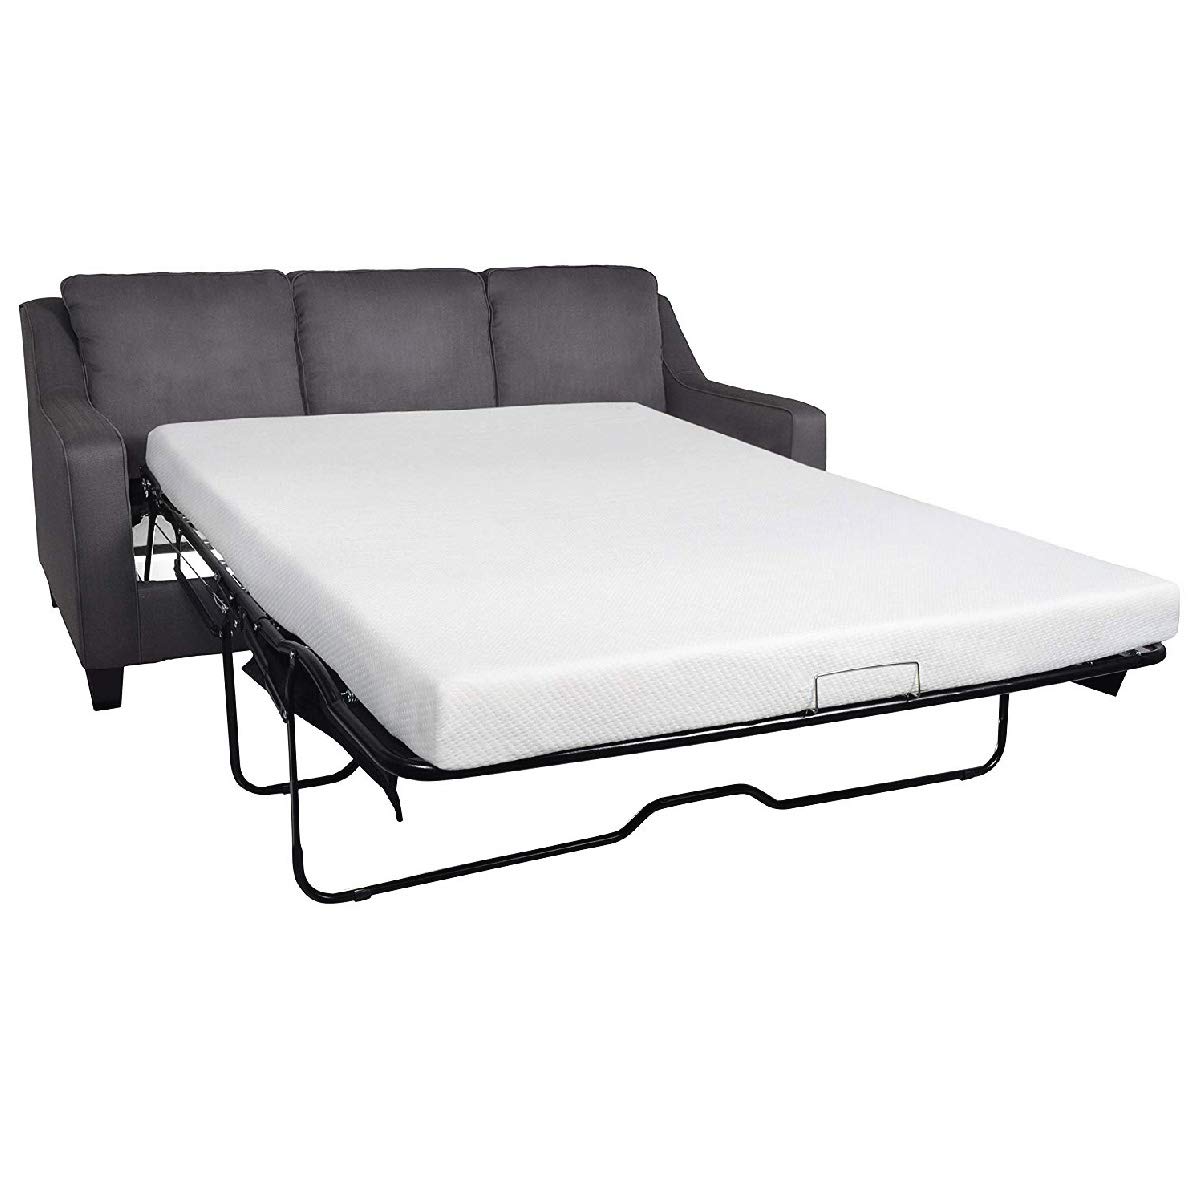 Where To Buy Mattress For Sofa Bed